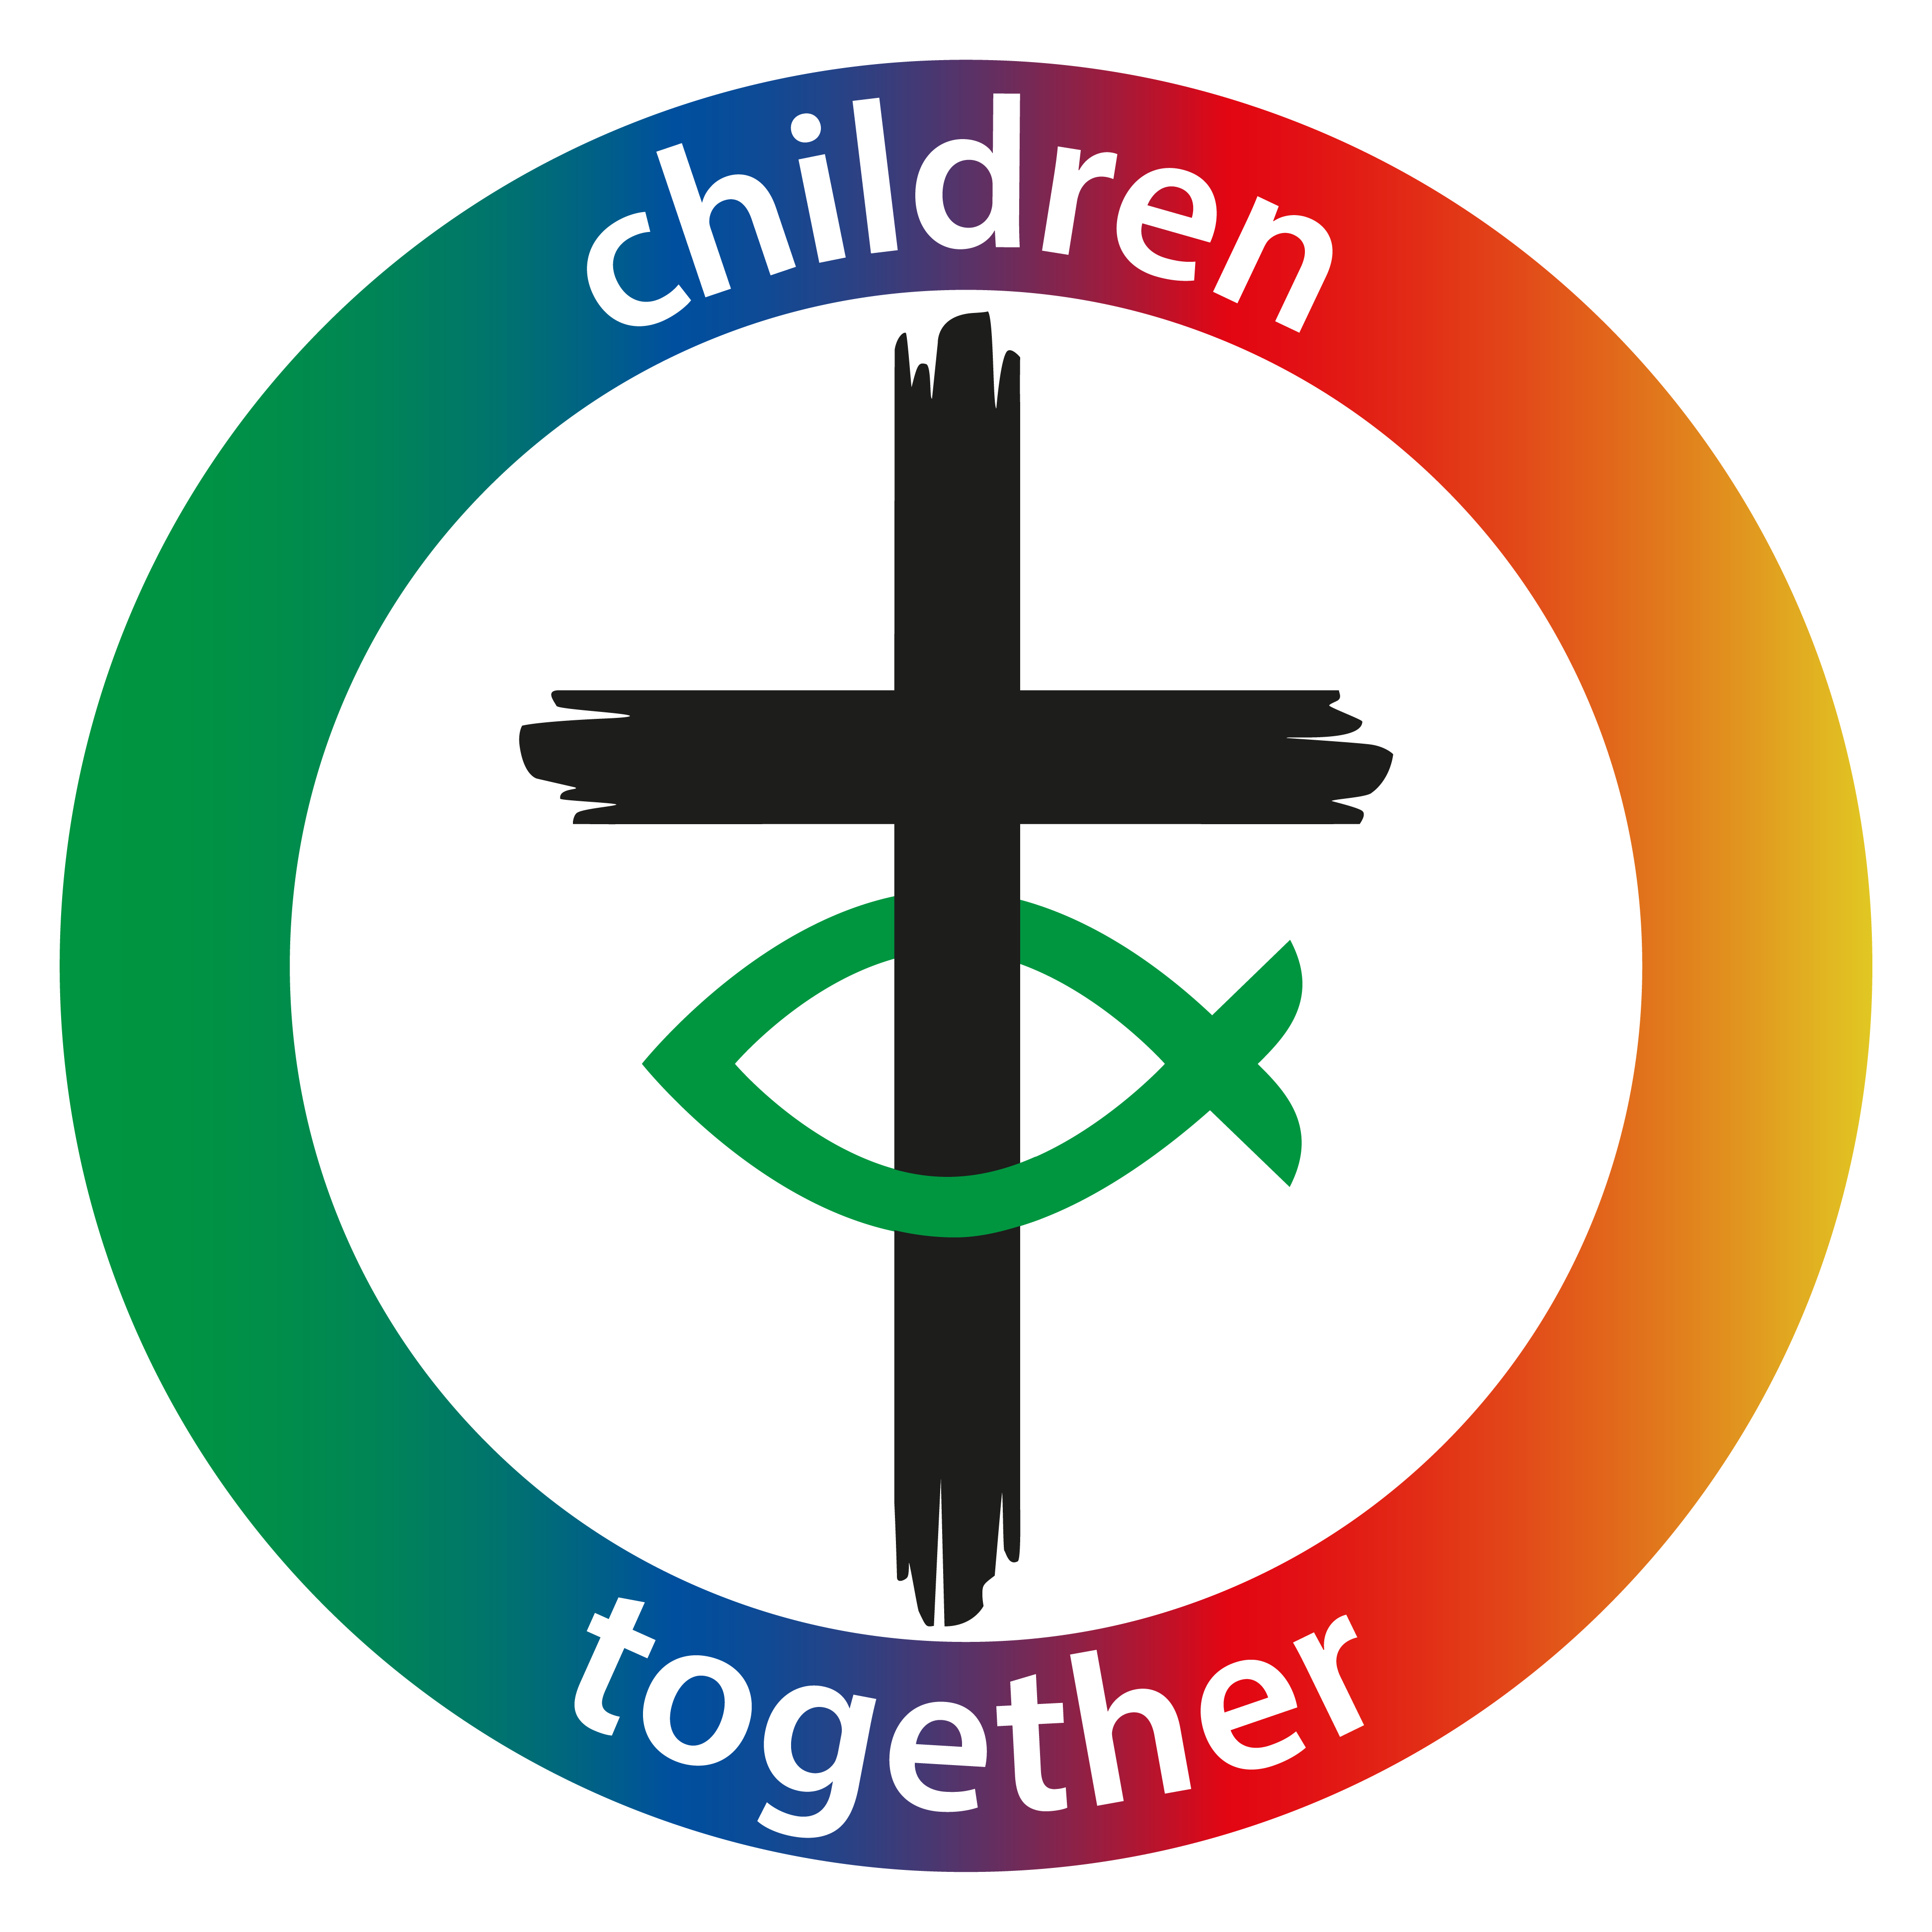 The Children and youth friendly church award plaque